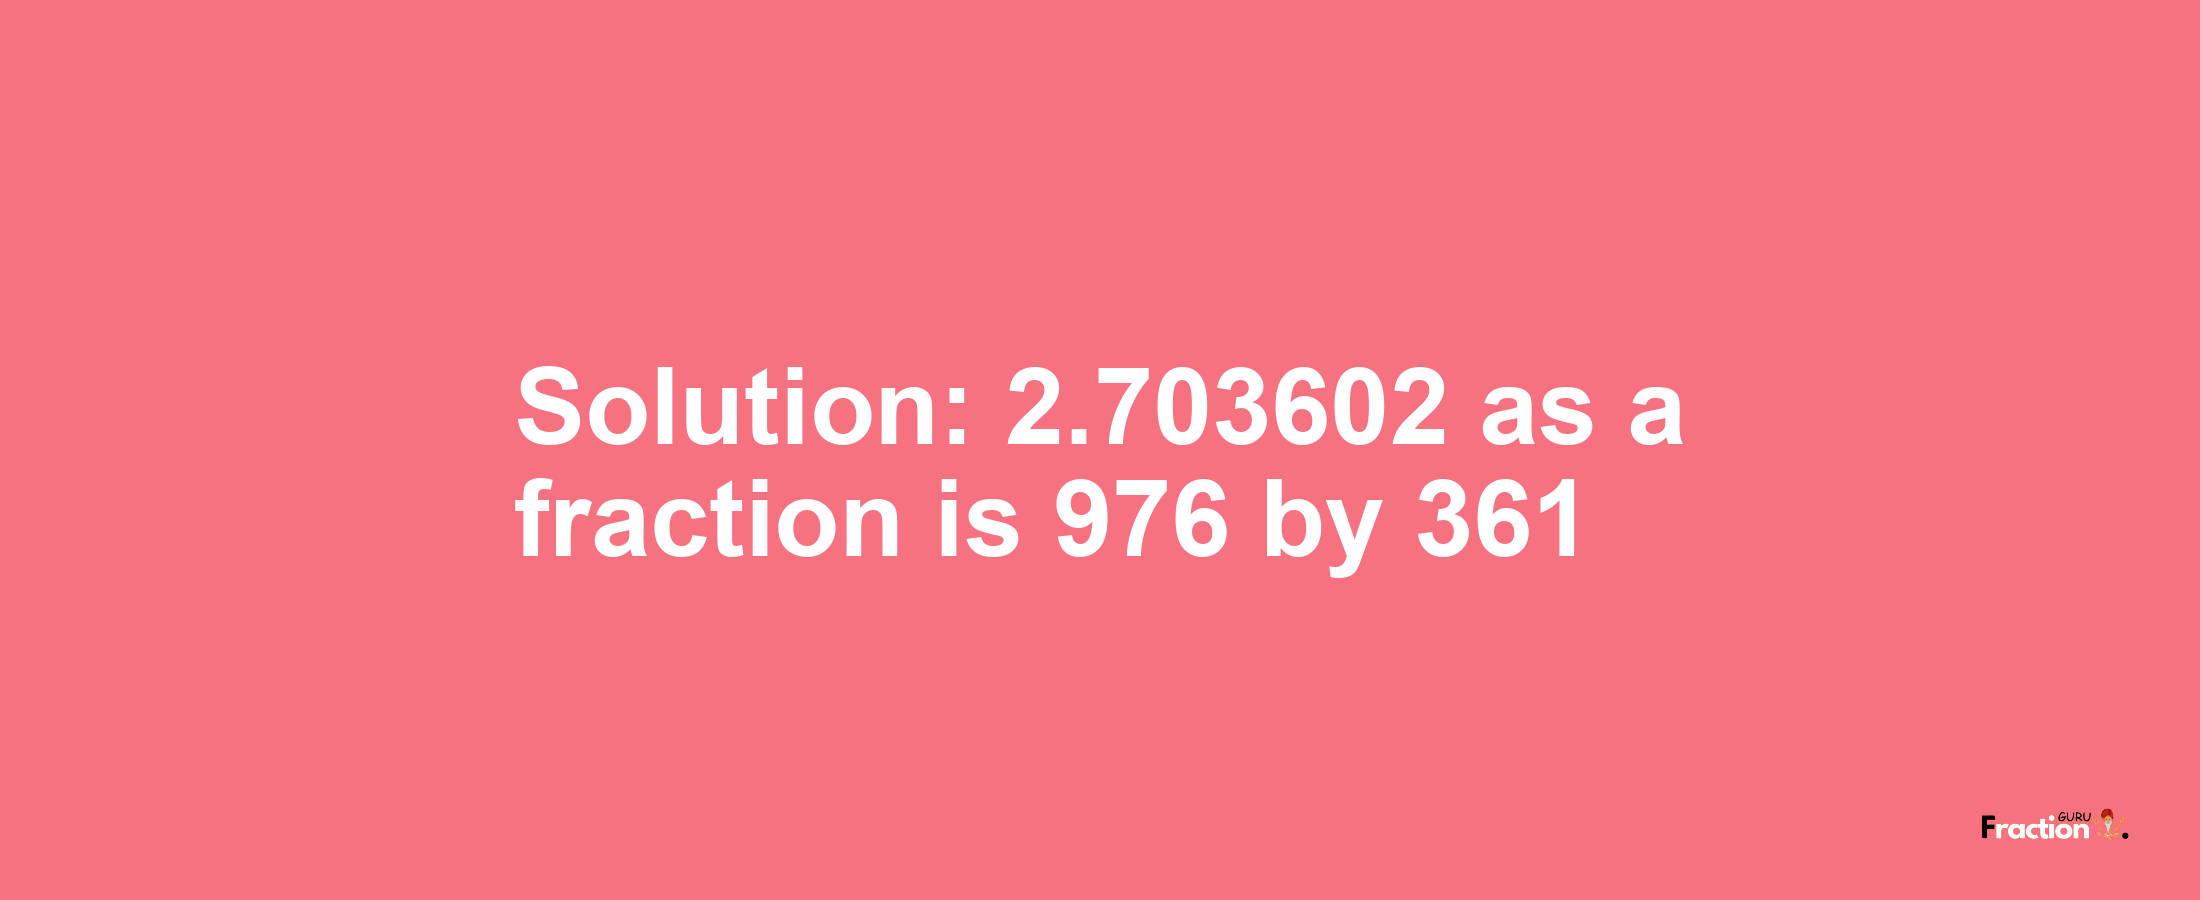 Solution:2.703602 as a fraction is 976/361